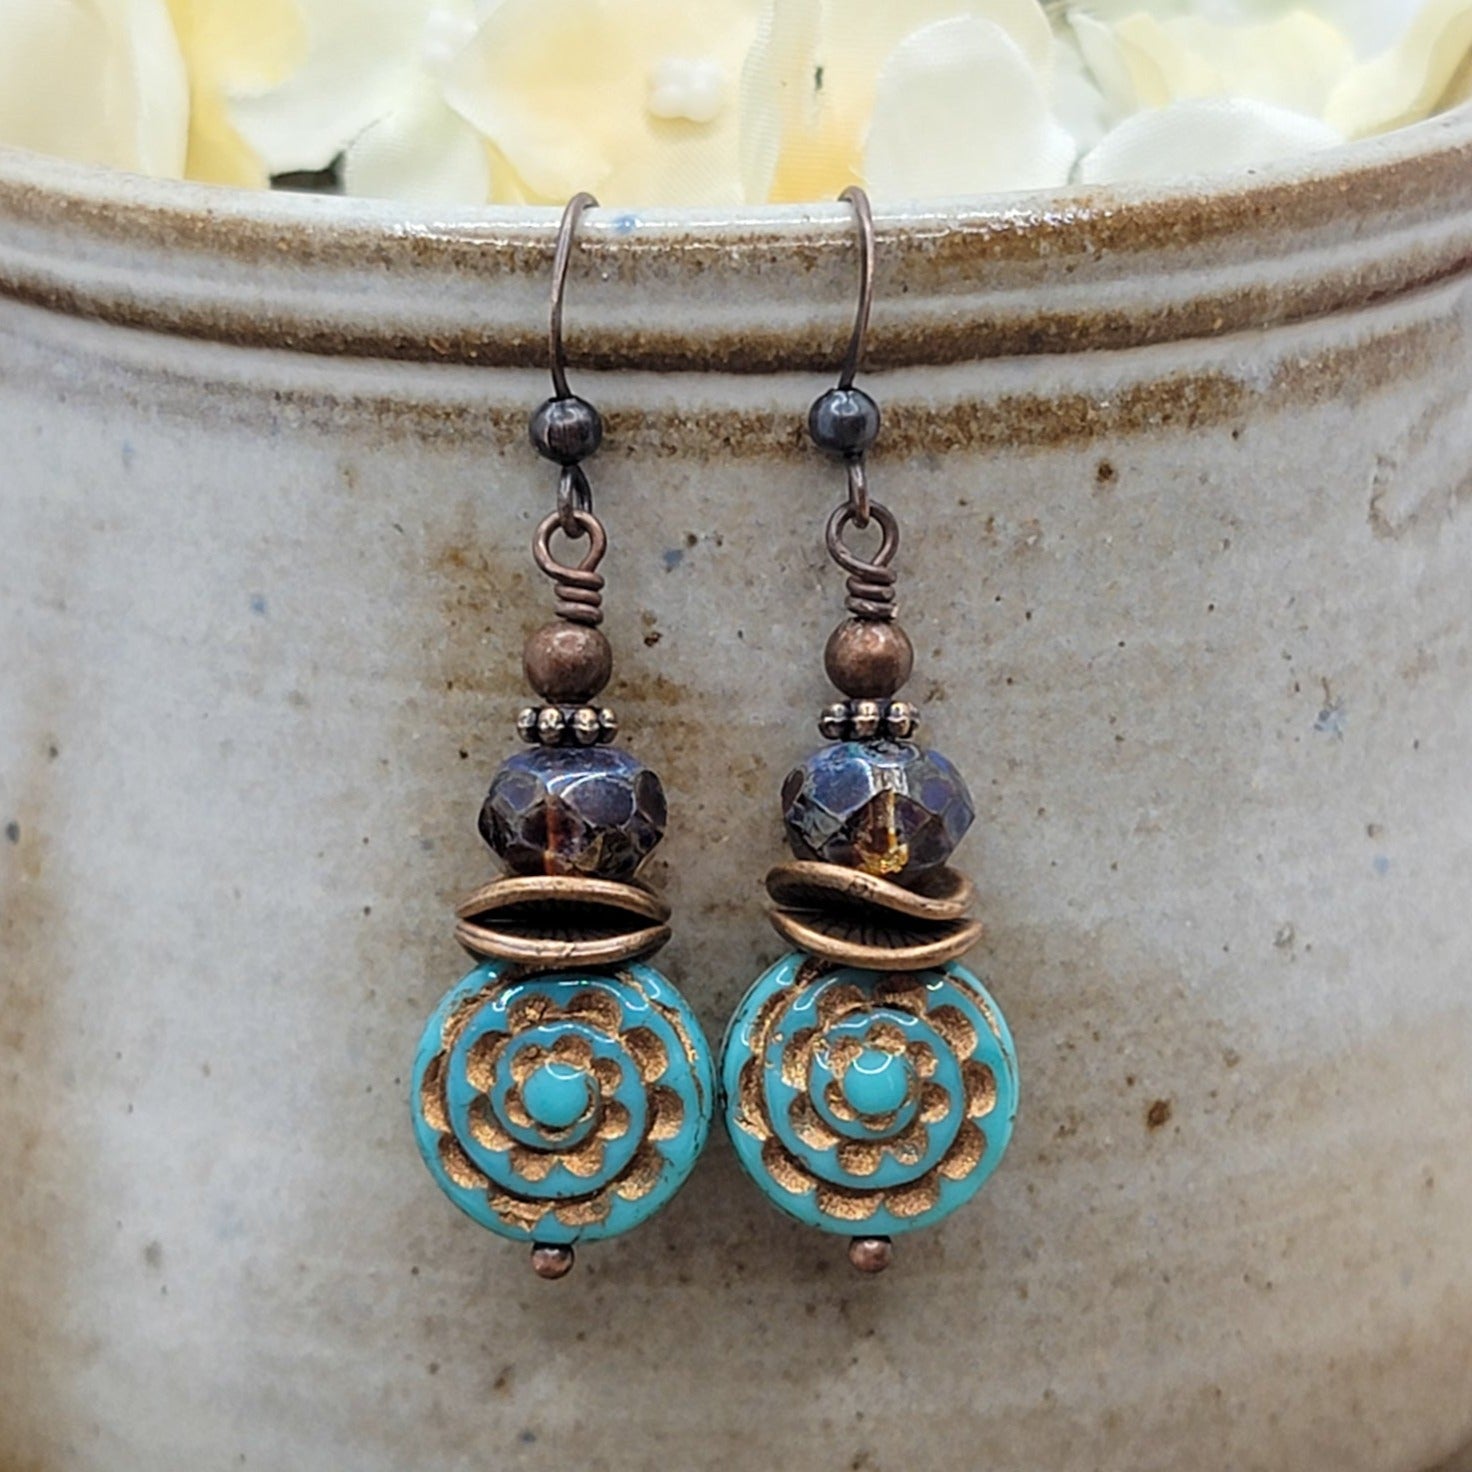 Rustic Turquoise and Copper Drop Earrings - Nicki Lynn Jewelry